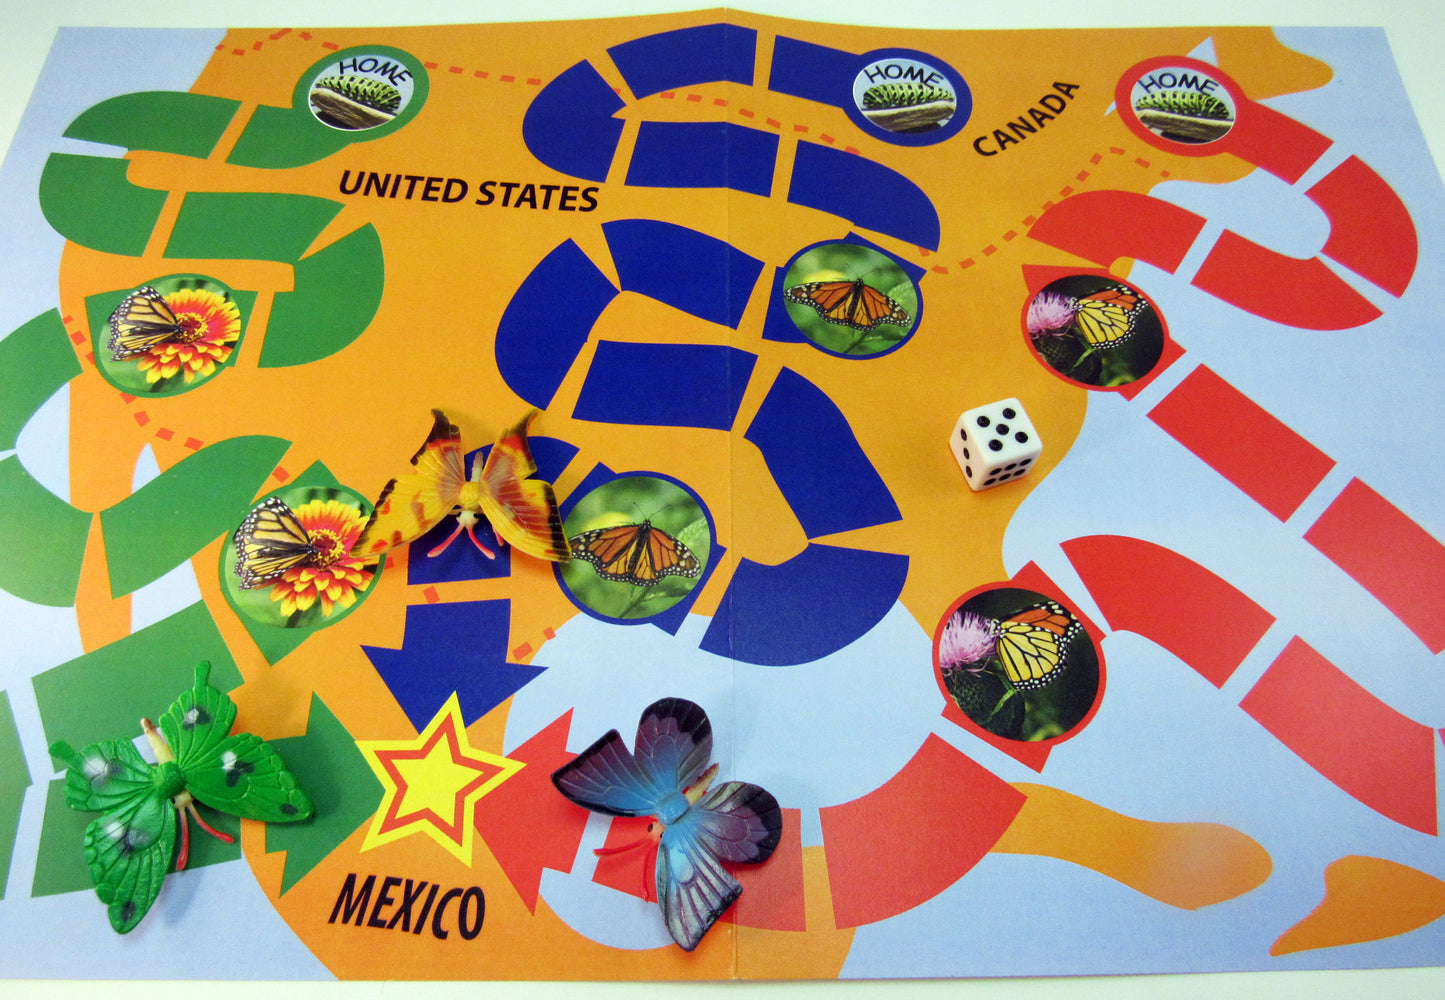 Mexi-Go a board game based on the butterfly migration - Ivy Kids Educational Activity Kit featuring the book Gotta Go! Gotta Go! by Sam Swope and over 10 art, literacy, math, and science activities inspired by the story. Learn about monarch butterflies. Perfect kit for spring.